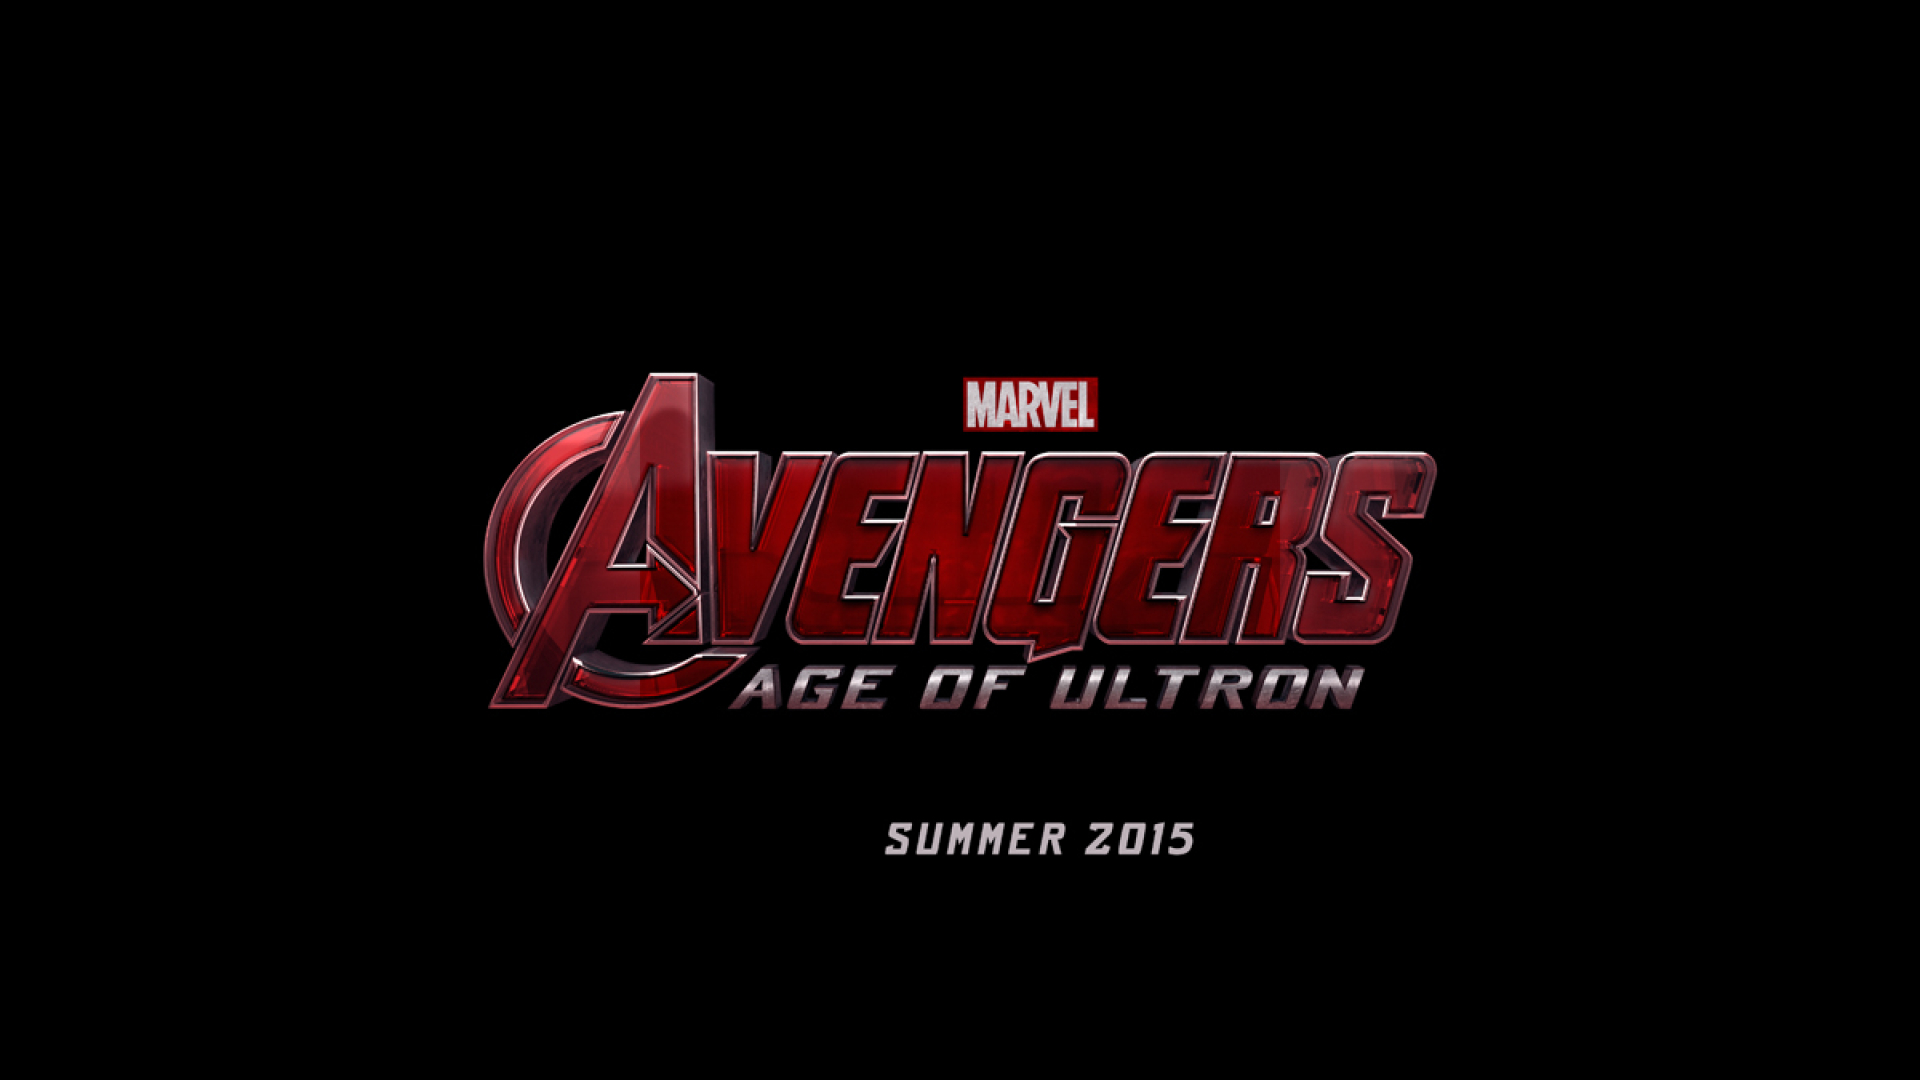 1920x1080 The Avengers 2 Age Of Ultron Logo 1080p Laptop Full Hd Images, Photos, Reviews